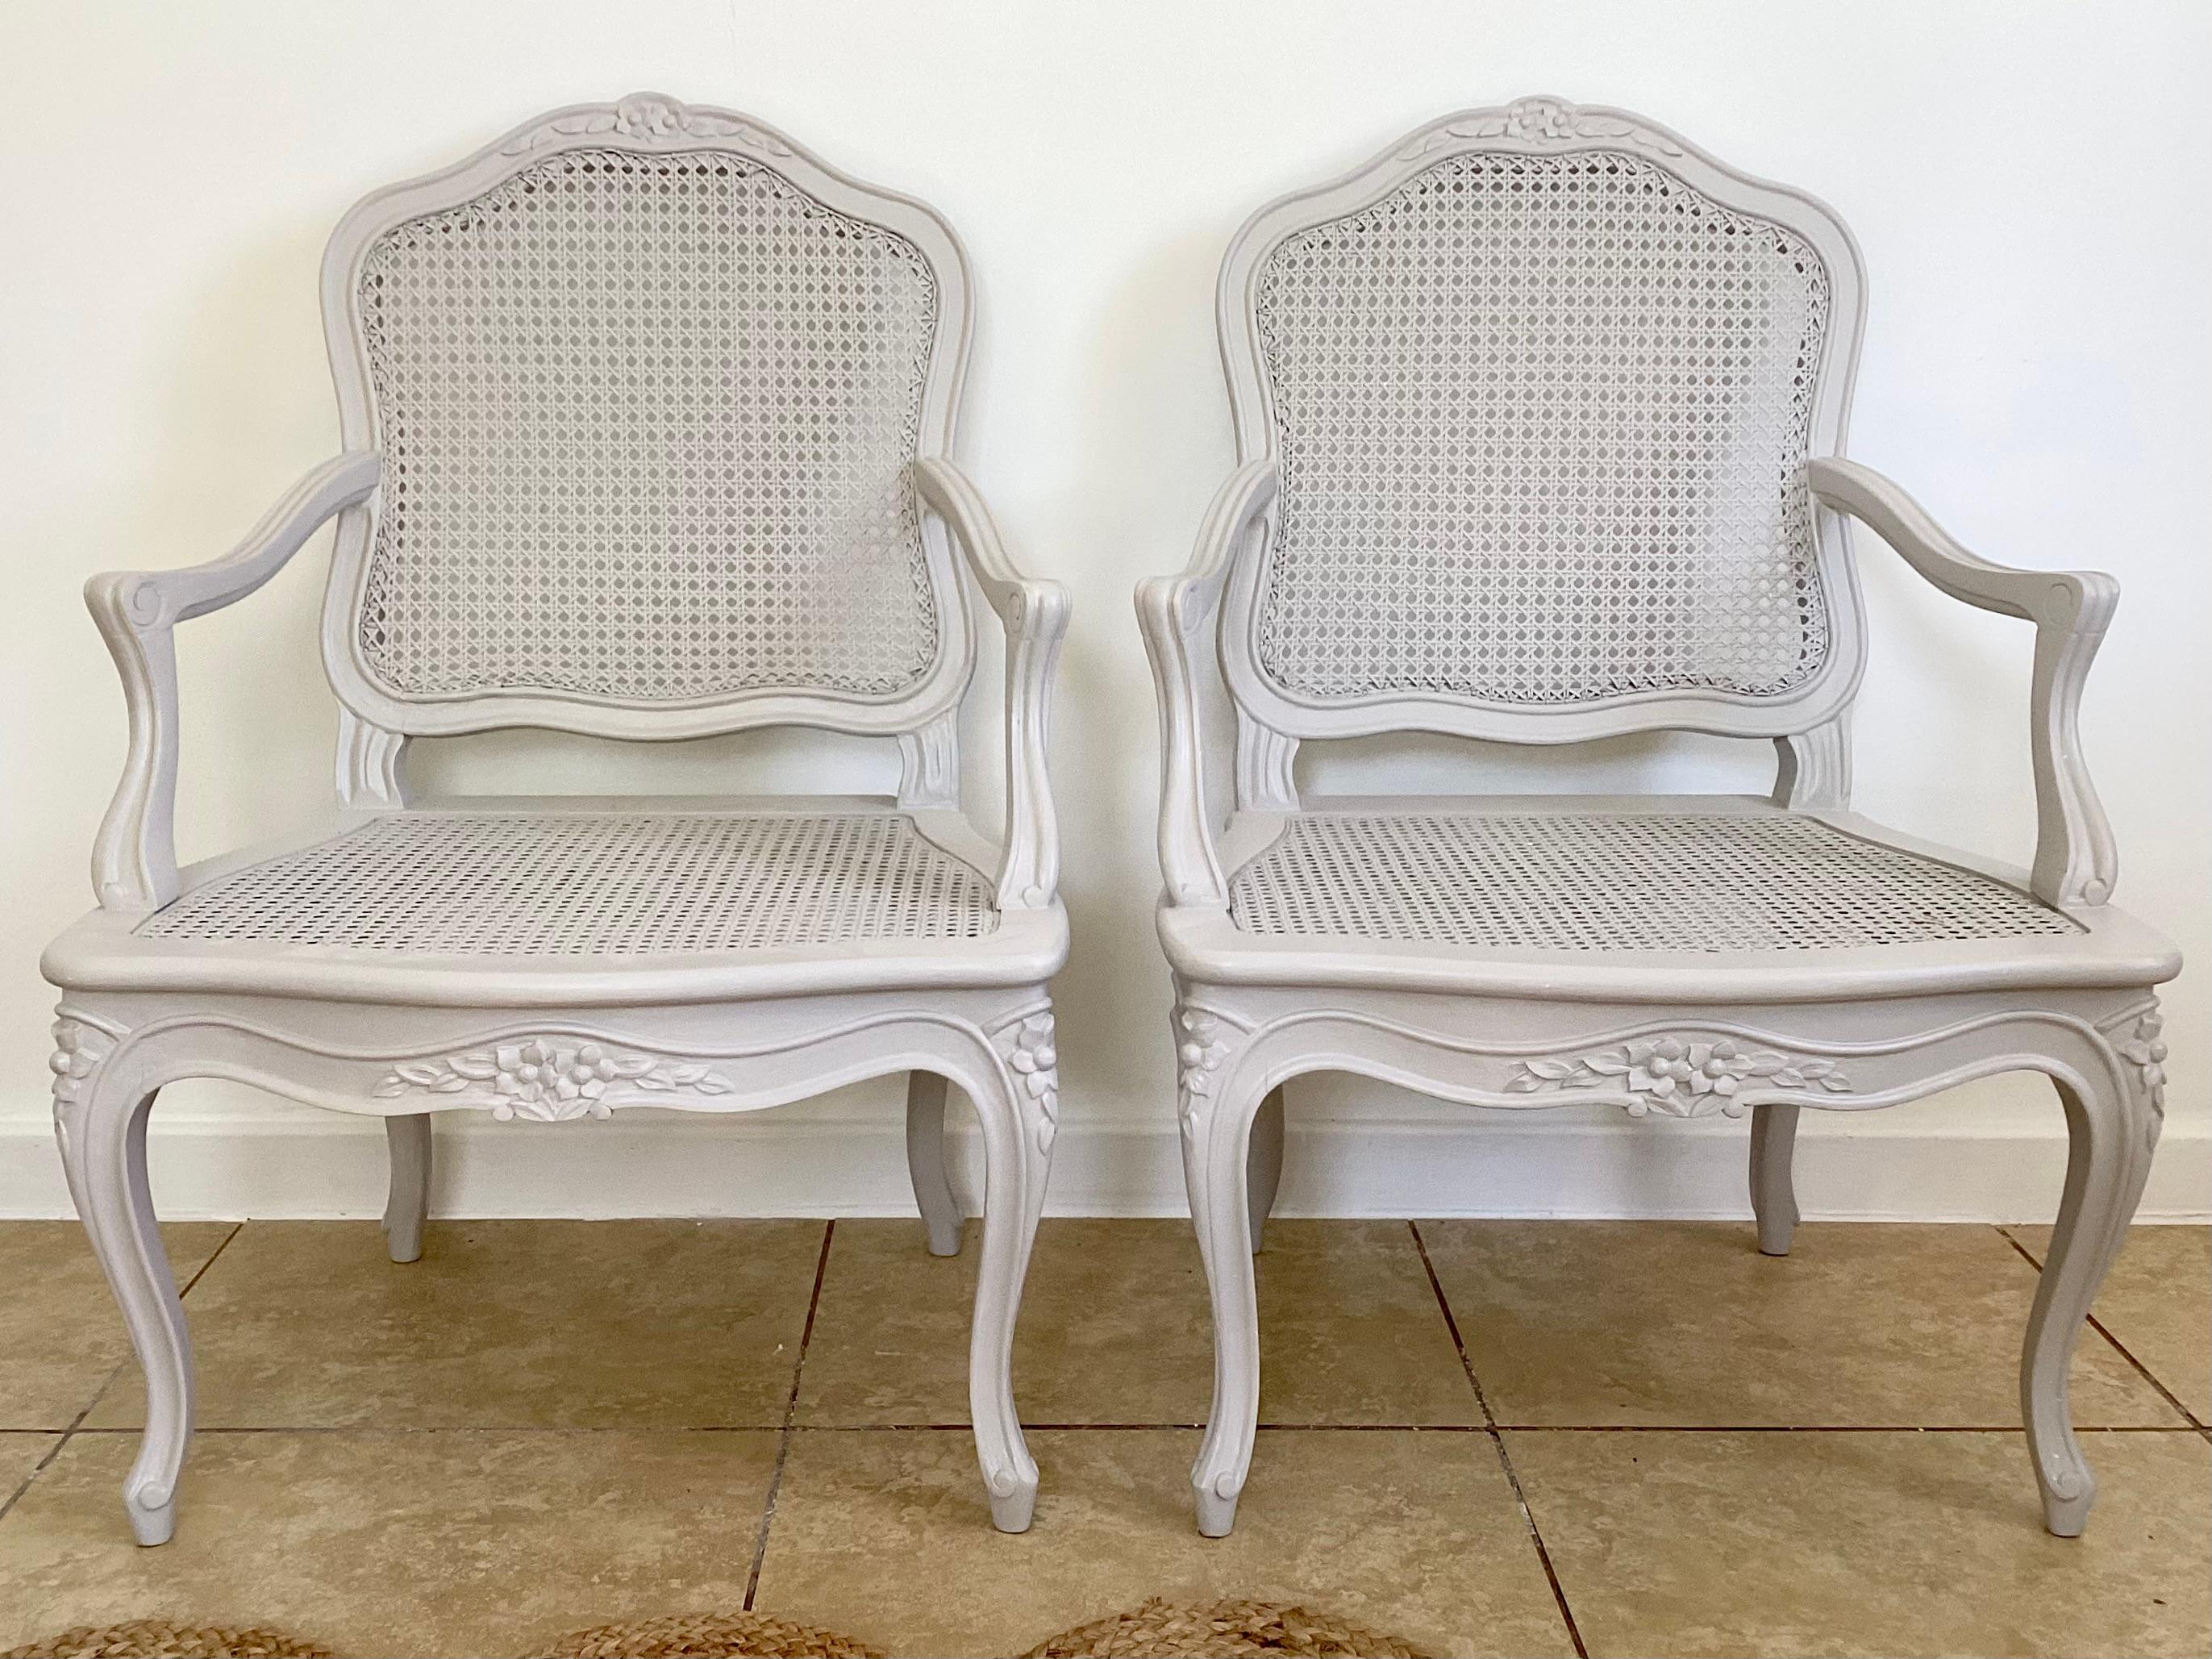 Pair of French Louis XV Fauteuil Guggenheim Collection with caned back and seat freshly lacquered in gray. We have a total of three pairs so collect them all. Add cushions to fit your style or leave as is.